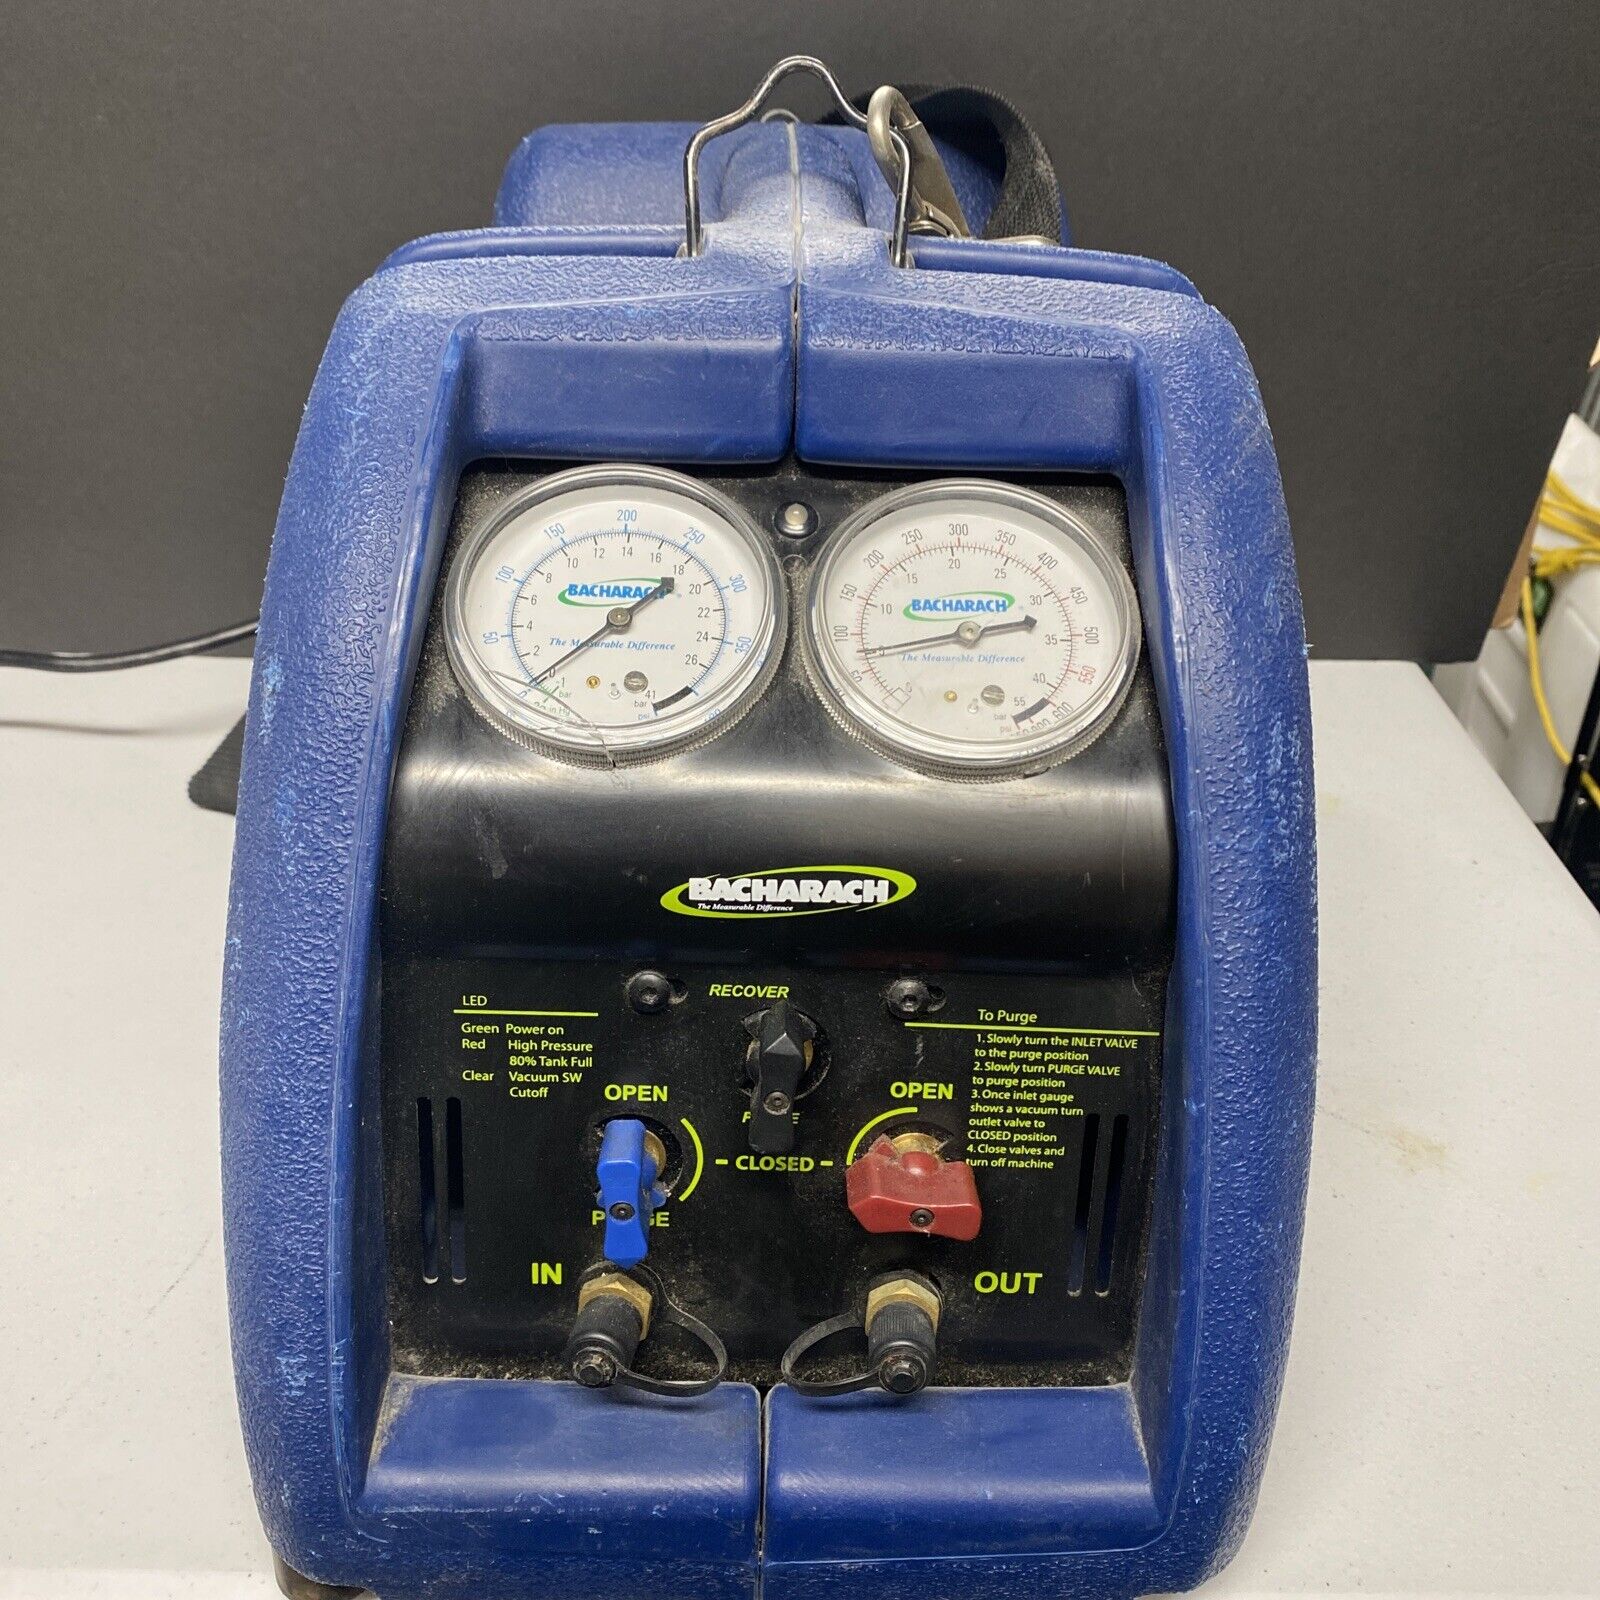 Stinger Bacharach 2000 Refrigerant Recovery System W/ Manual Missing Bottom Legs